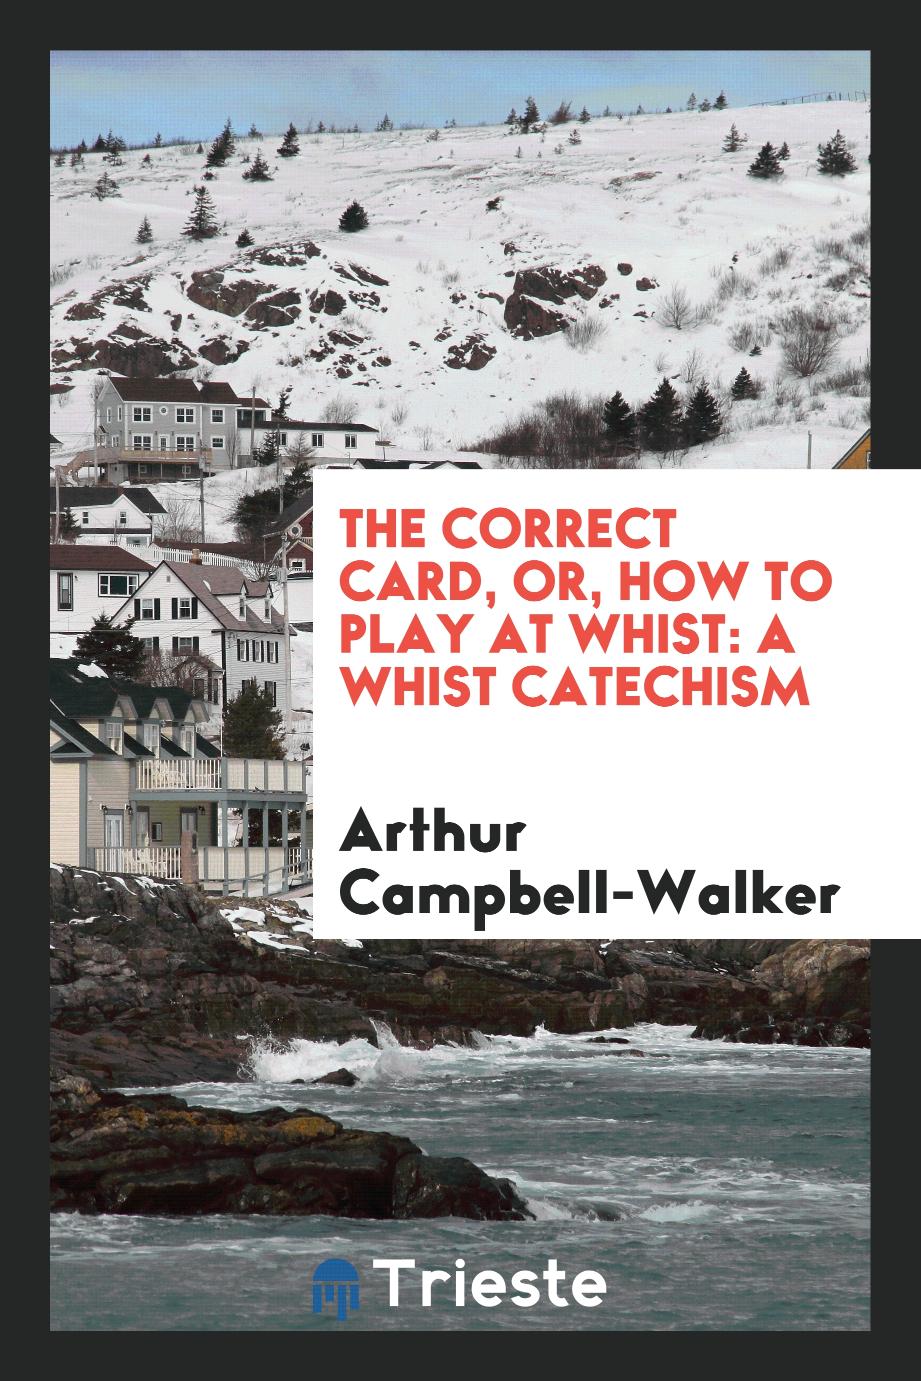 The Correct Card, or, How to Play at Whist: A Whist Catechism